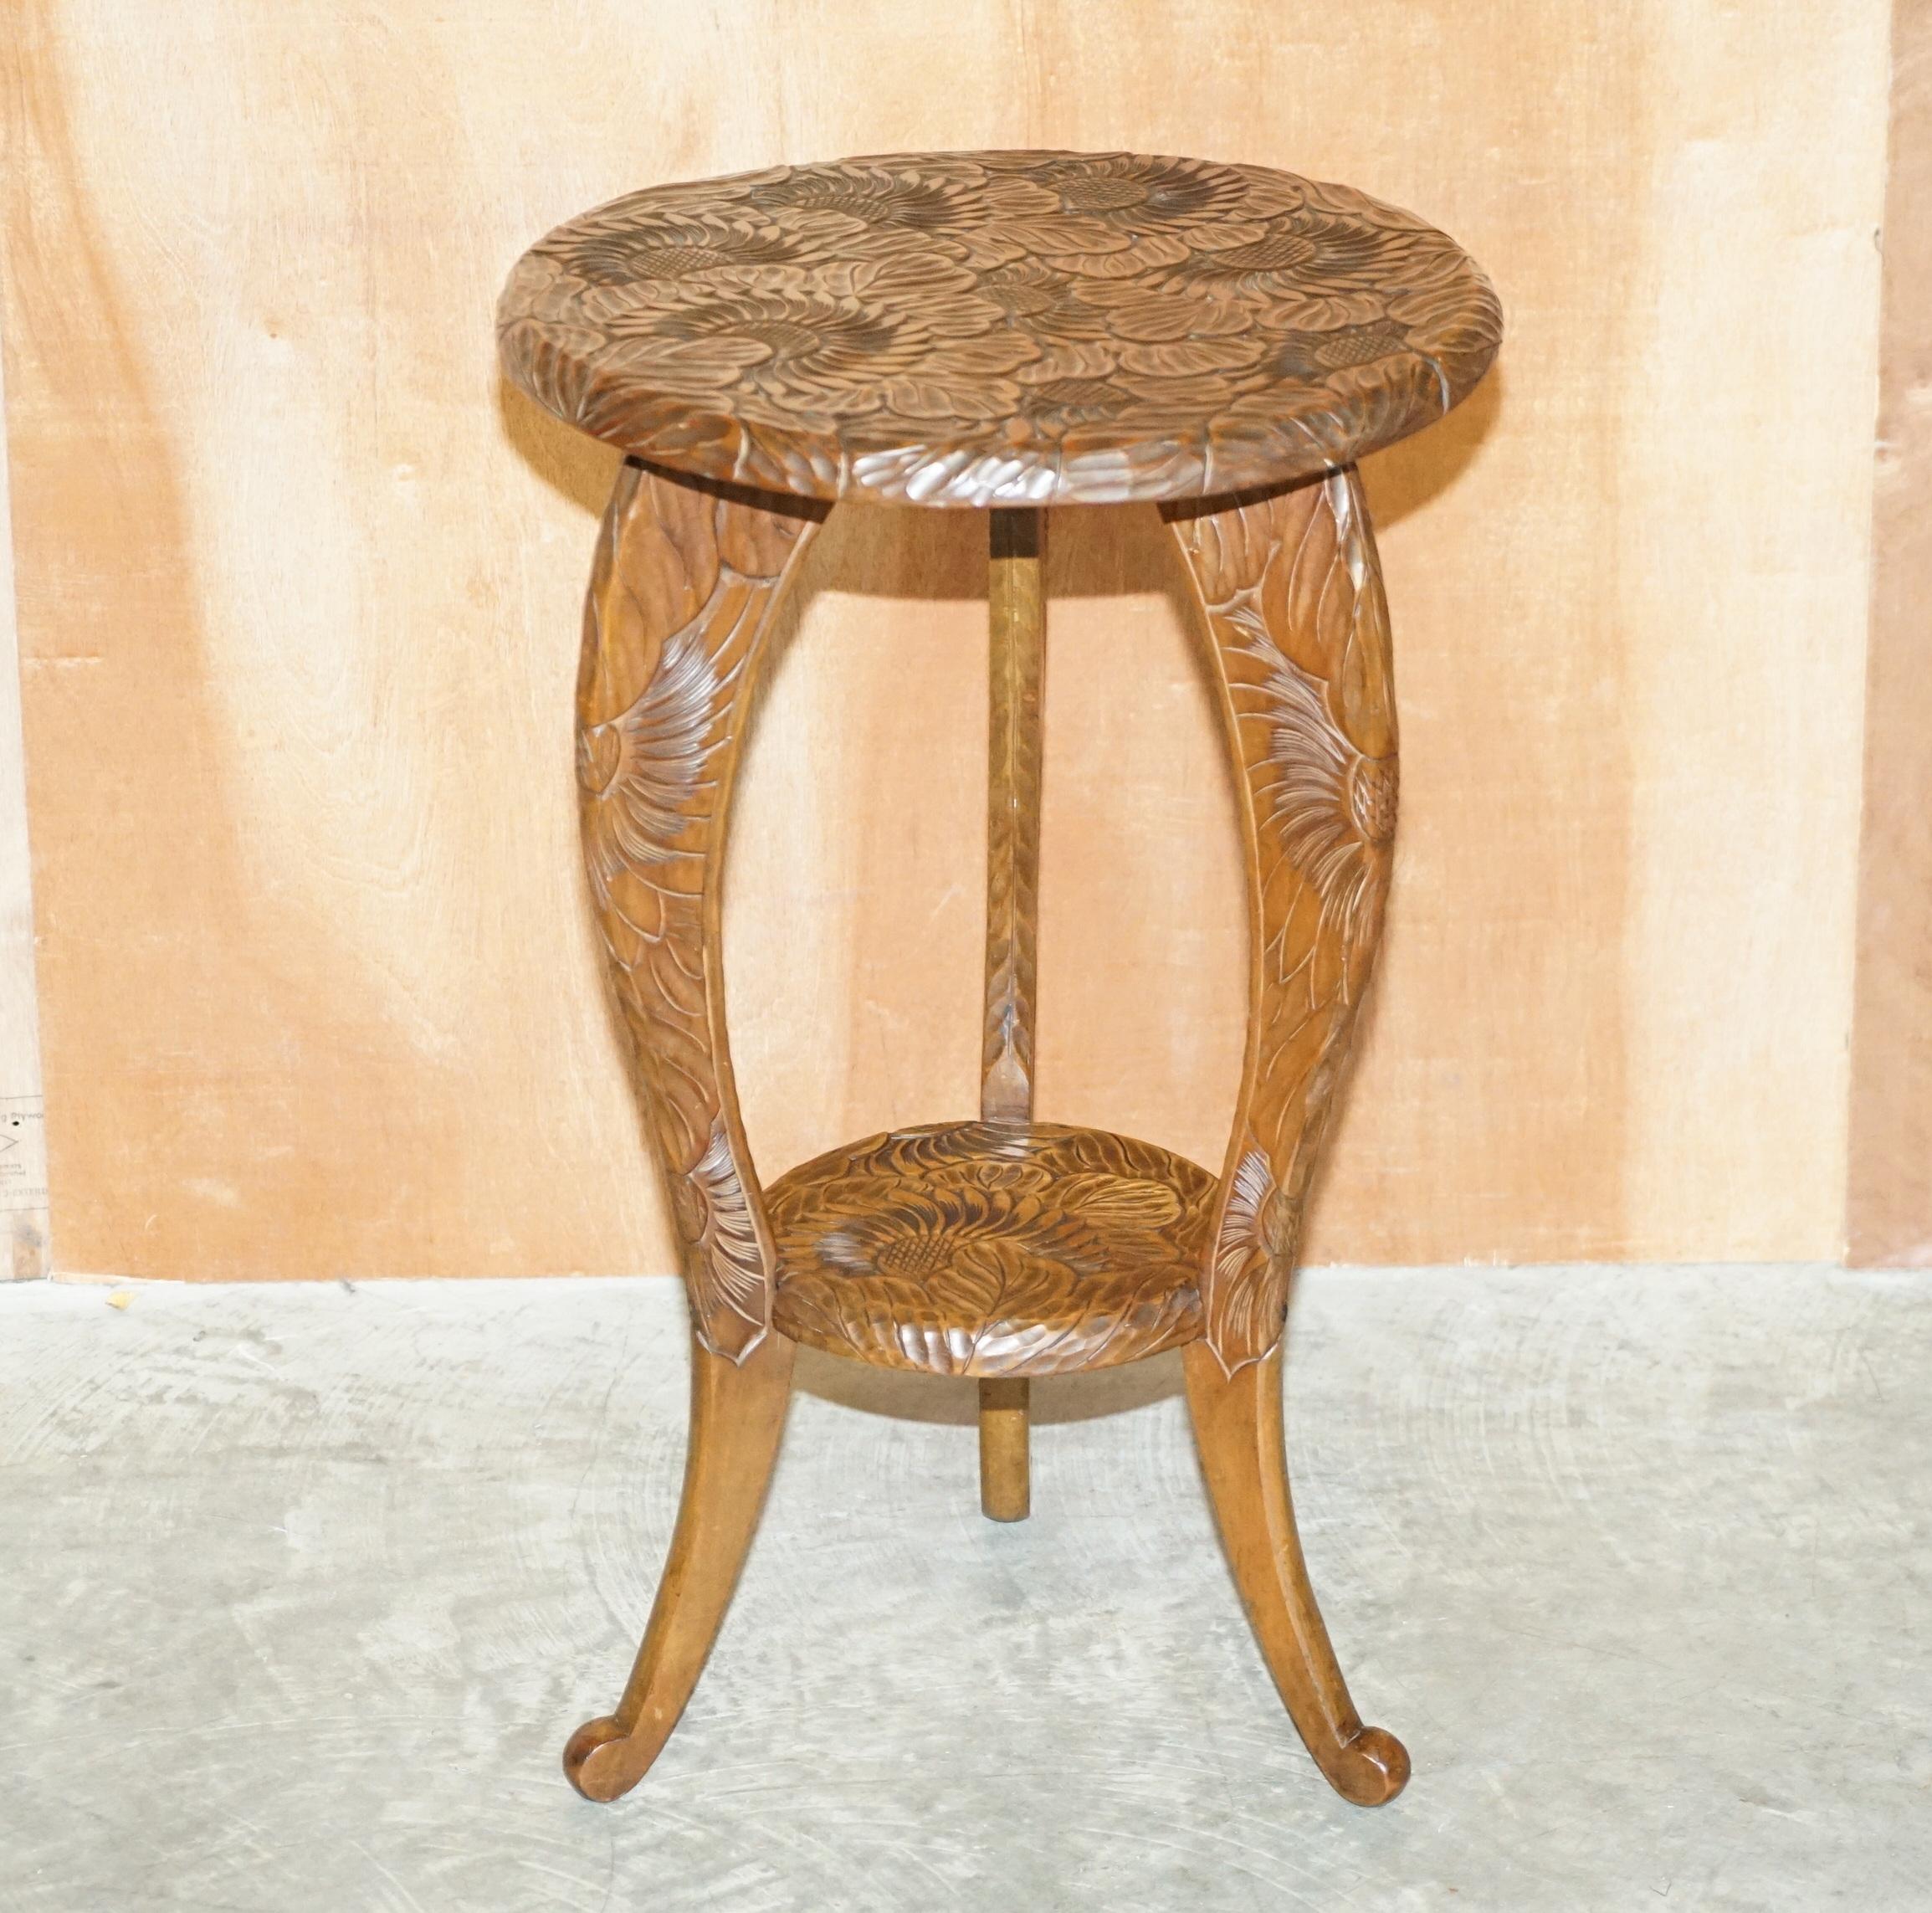 We are delighted to offer for sale this lovely Liberty’s London 1905 Japanese mahogany side table.

A good-looking piece, its hand carved from top to bottom with floral detailing, I have variations of these types of tables and one very rare chair